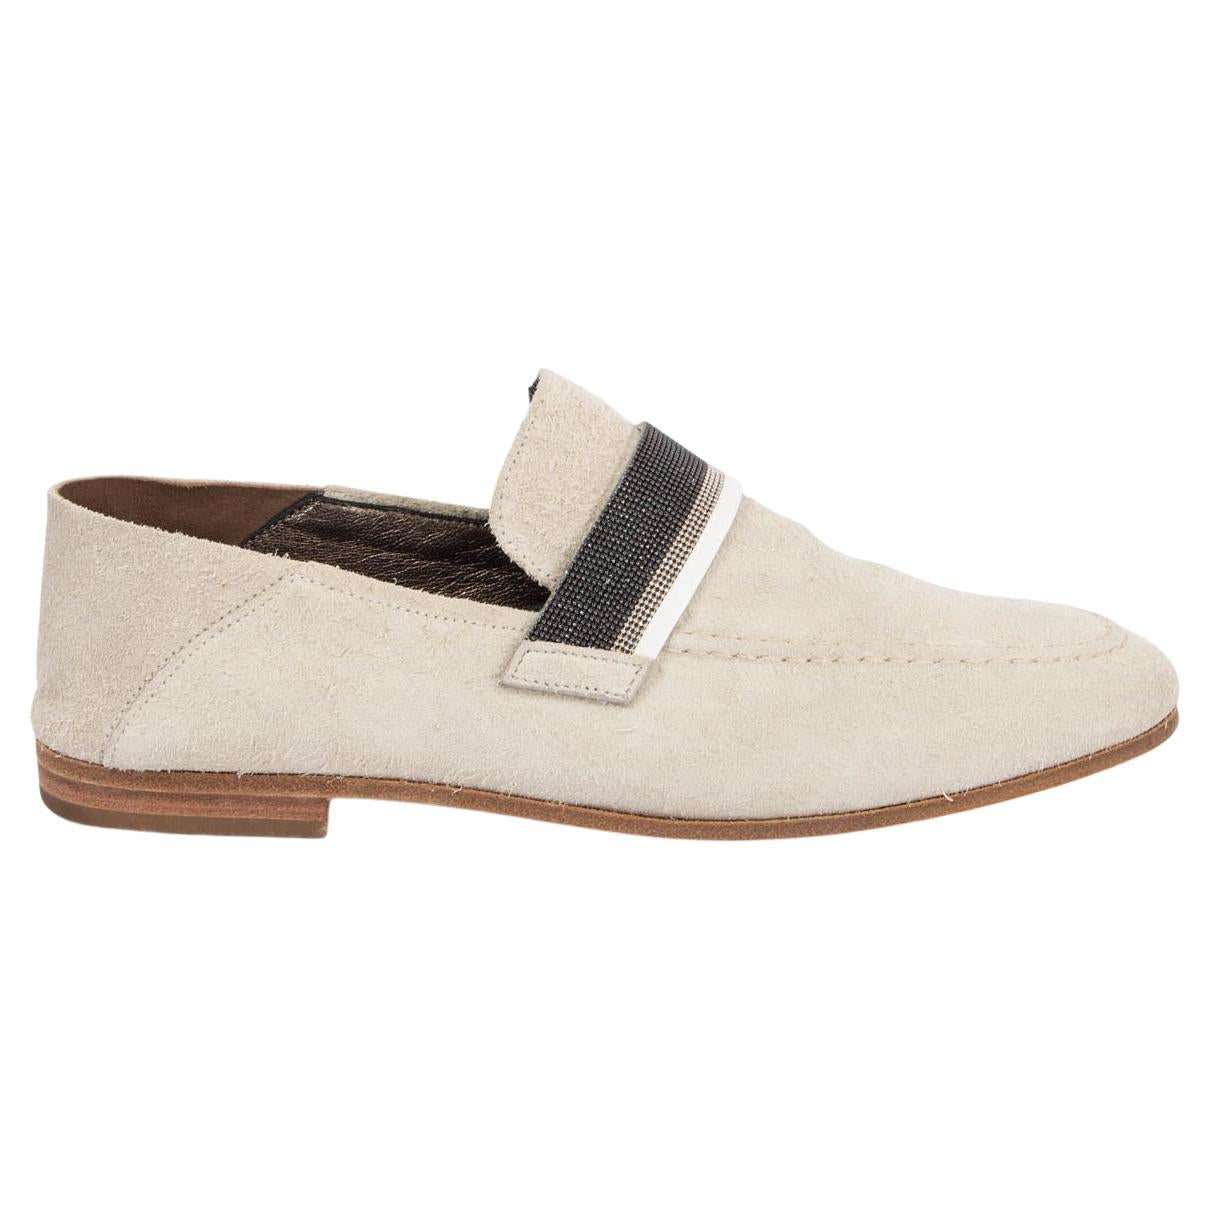 BRUNELLO CUCINELLI ivory suede MONILI Loafers Shoes 38